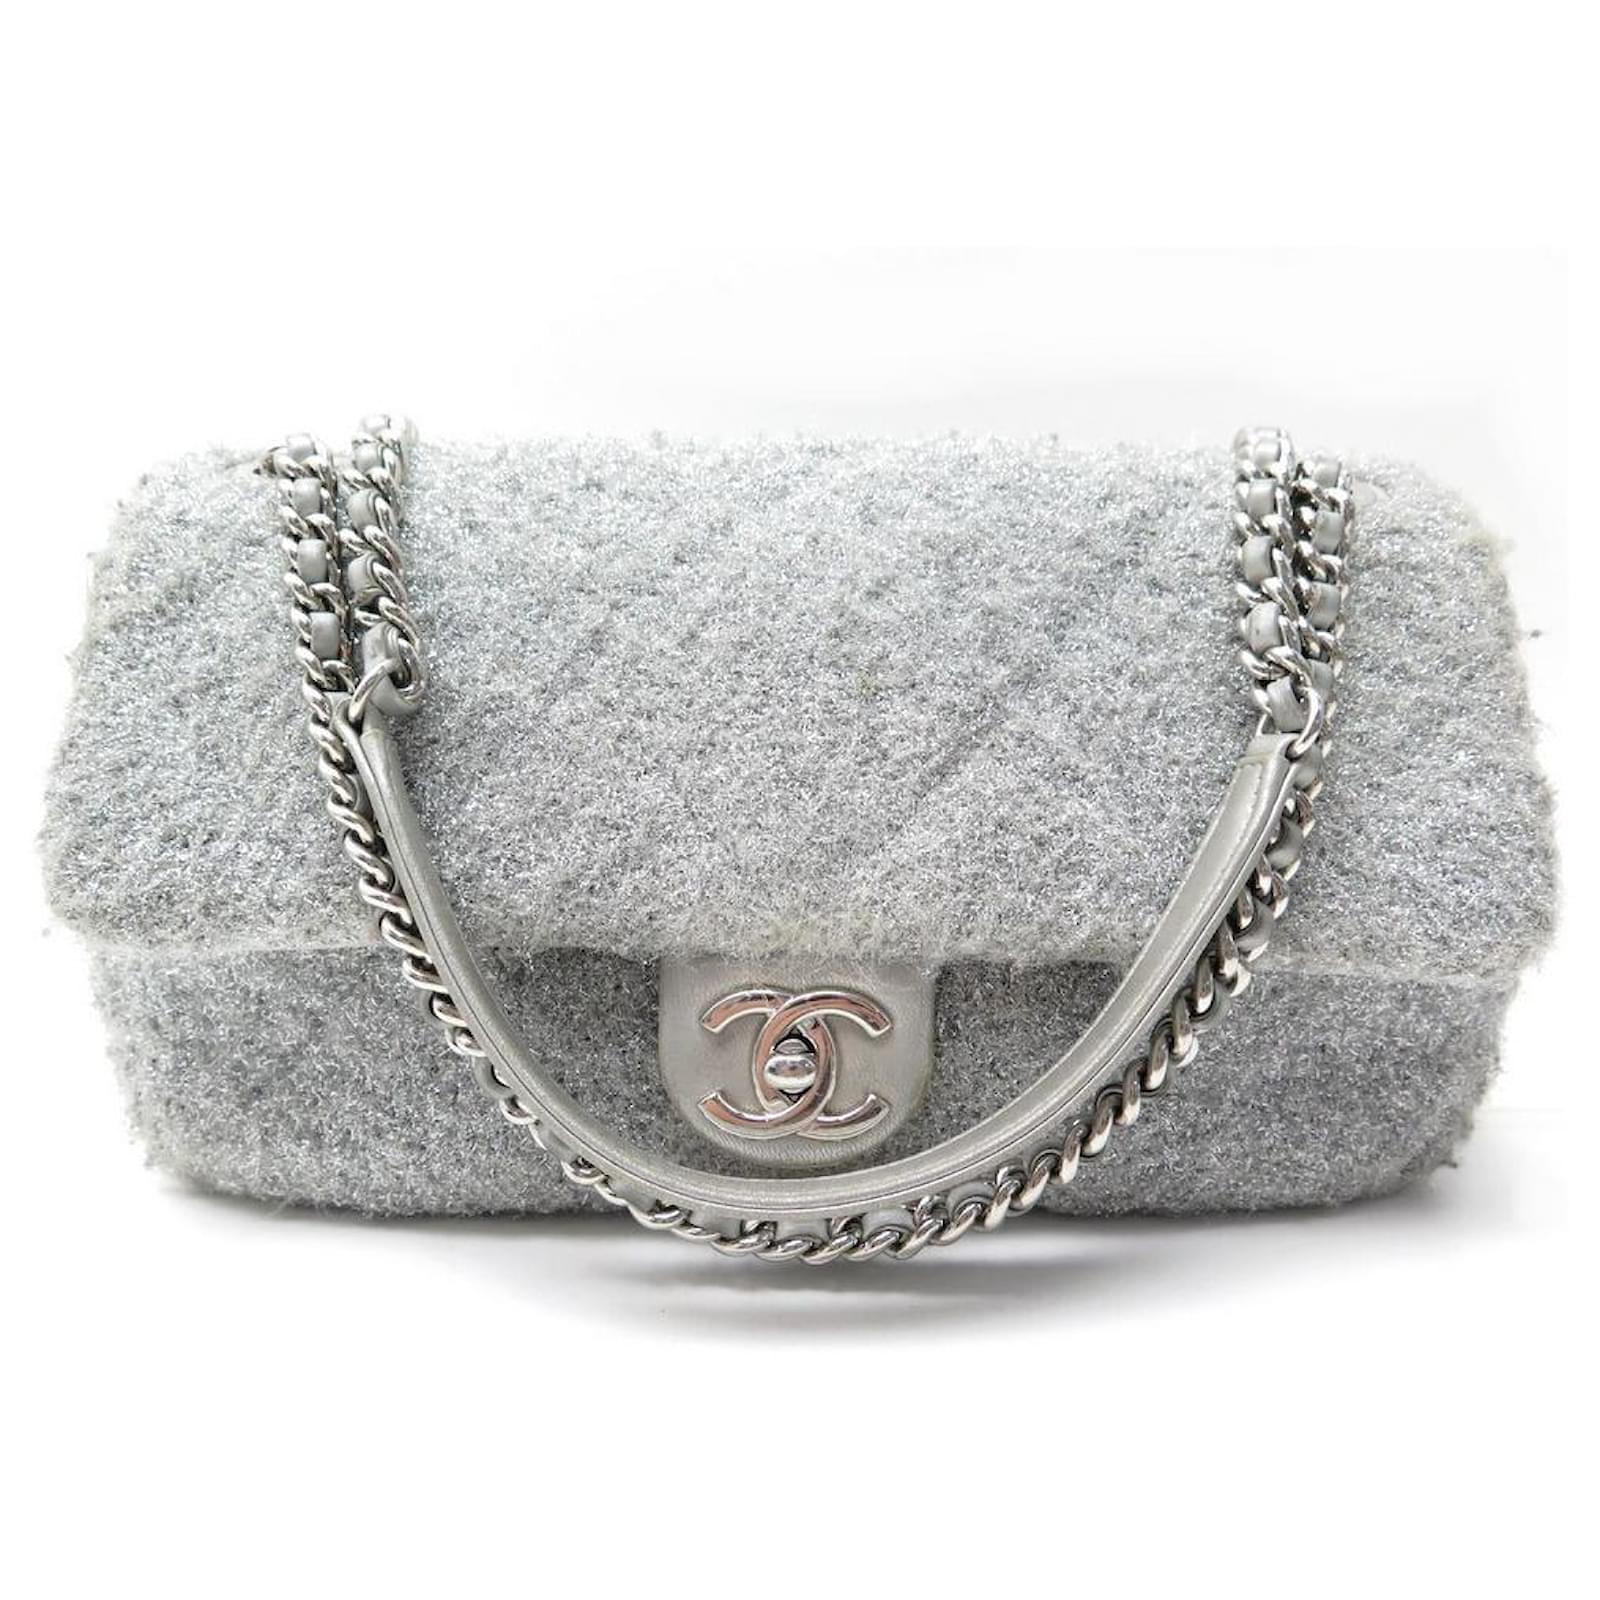 CHANEL TIMELESS CLASSIC ED LIMITED HANDBAG IN WOOL BANDOULIERE